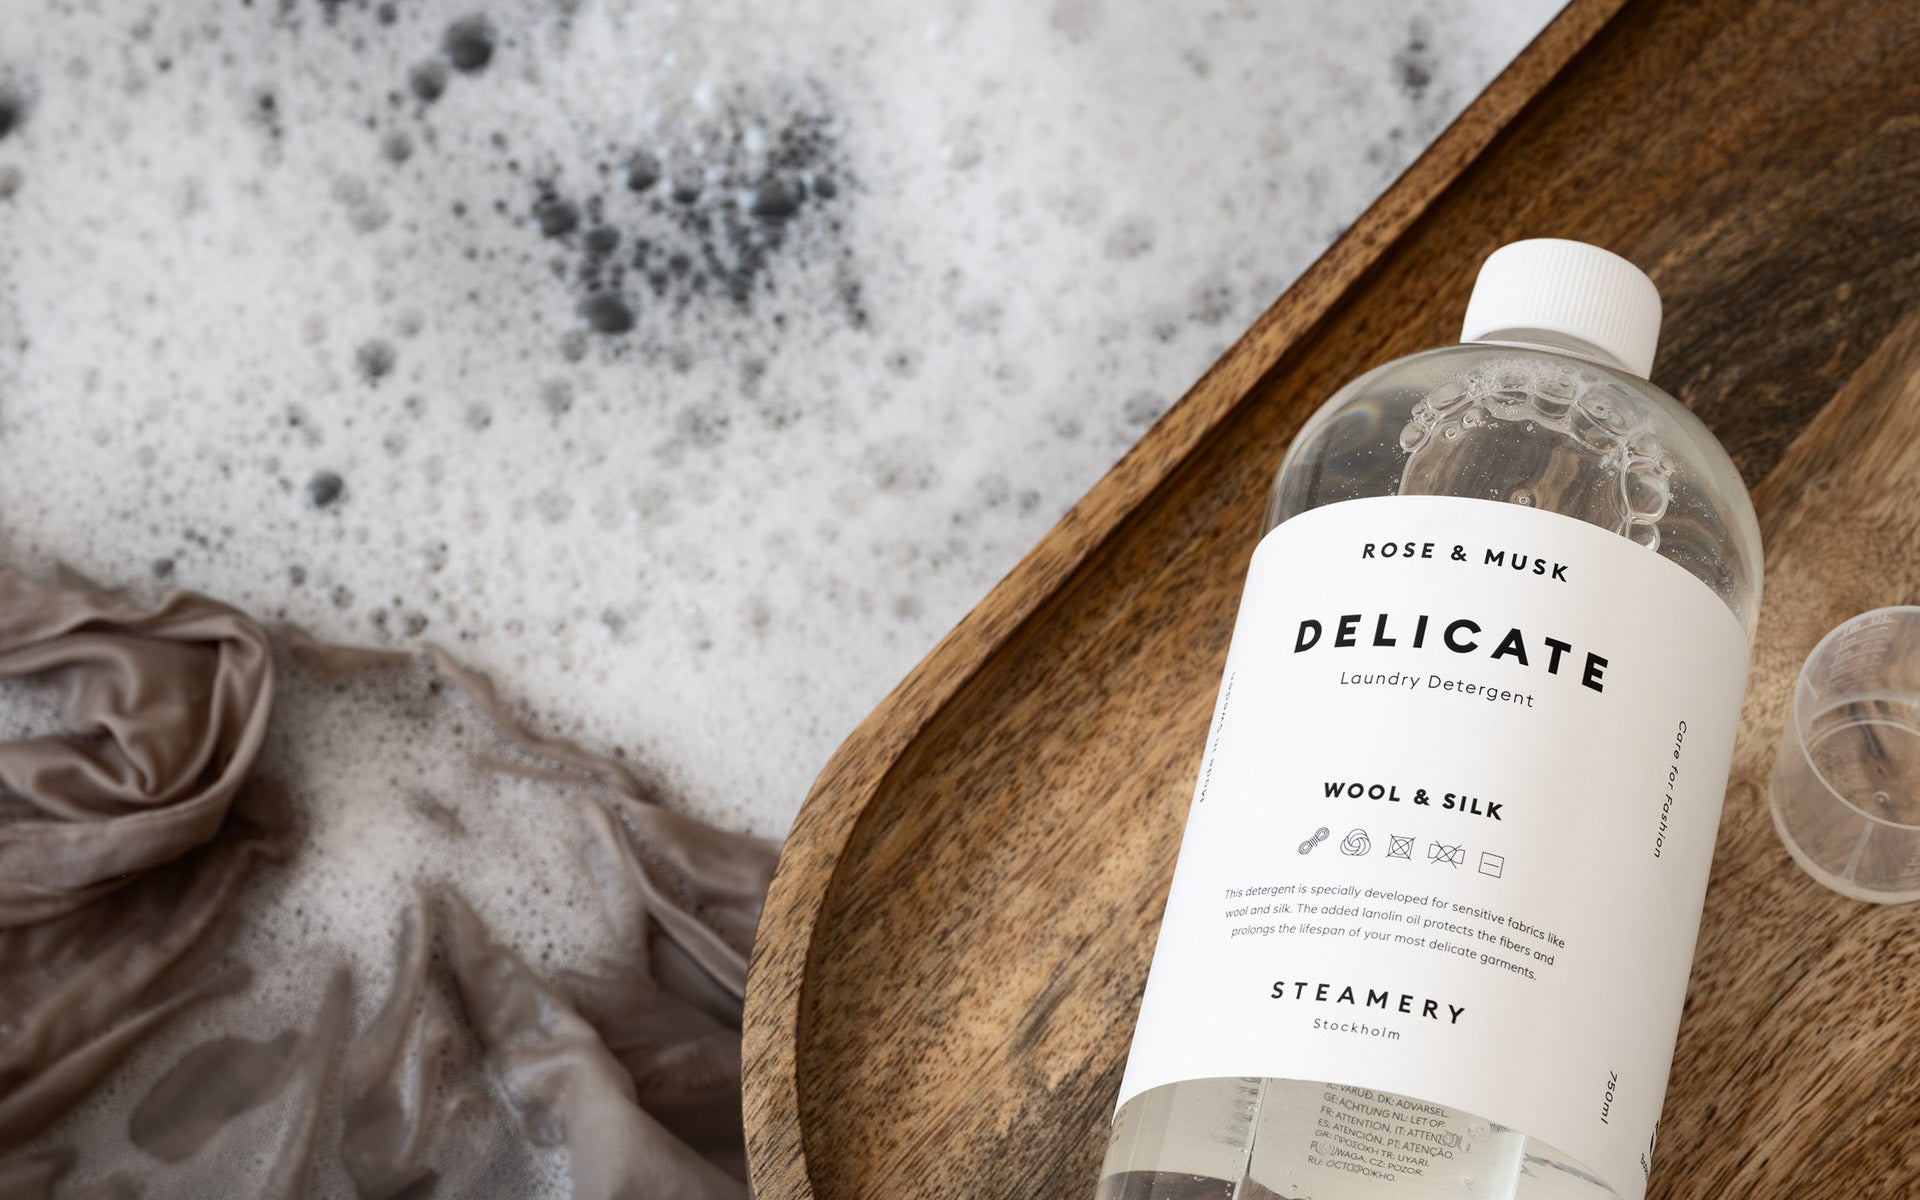 Steamery delicate detergent with soapy water